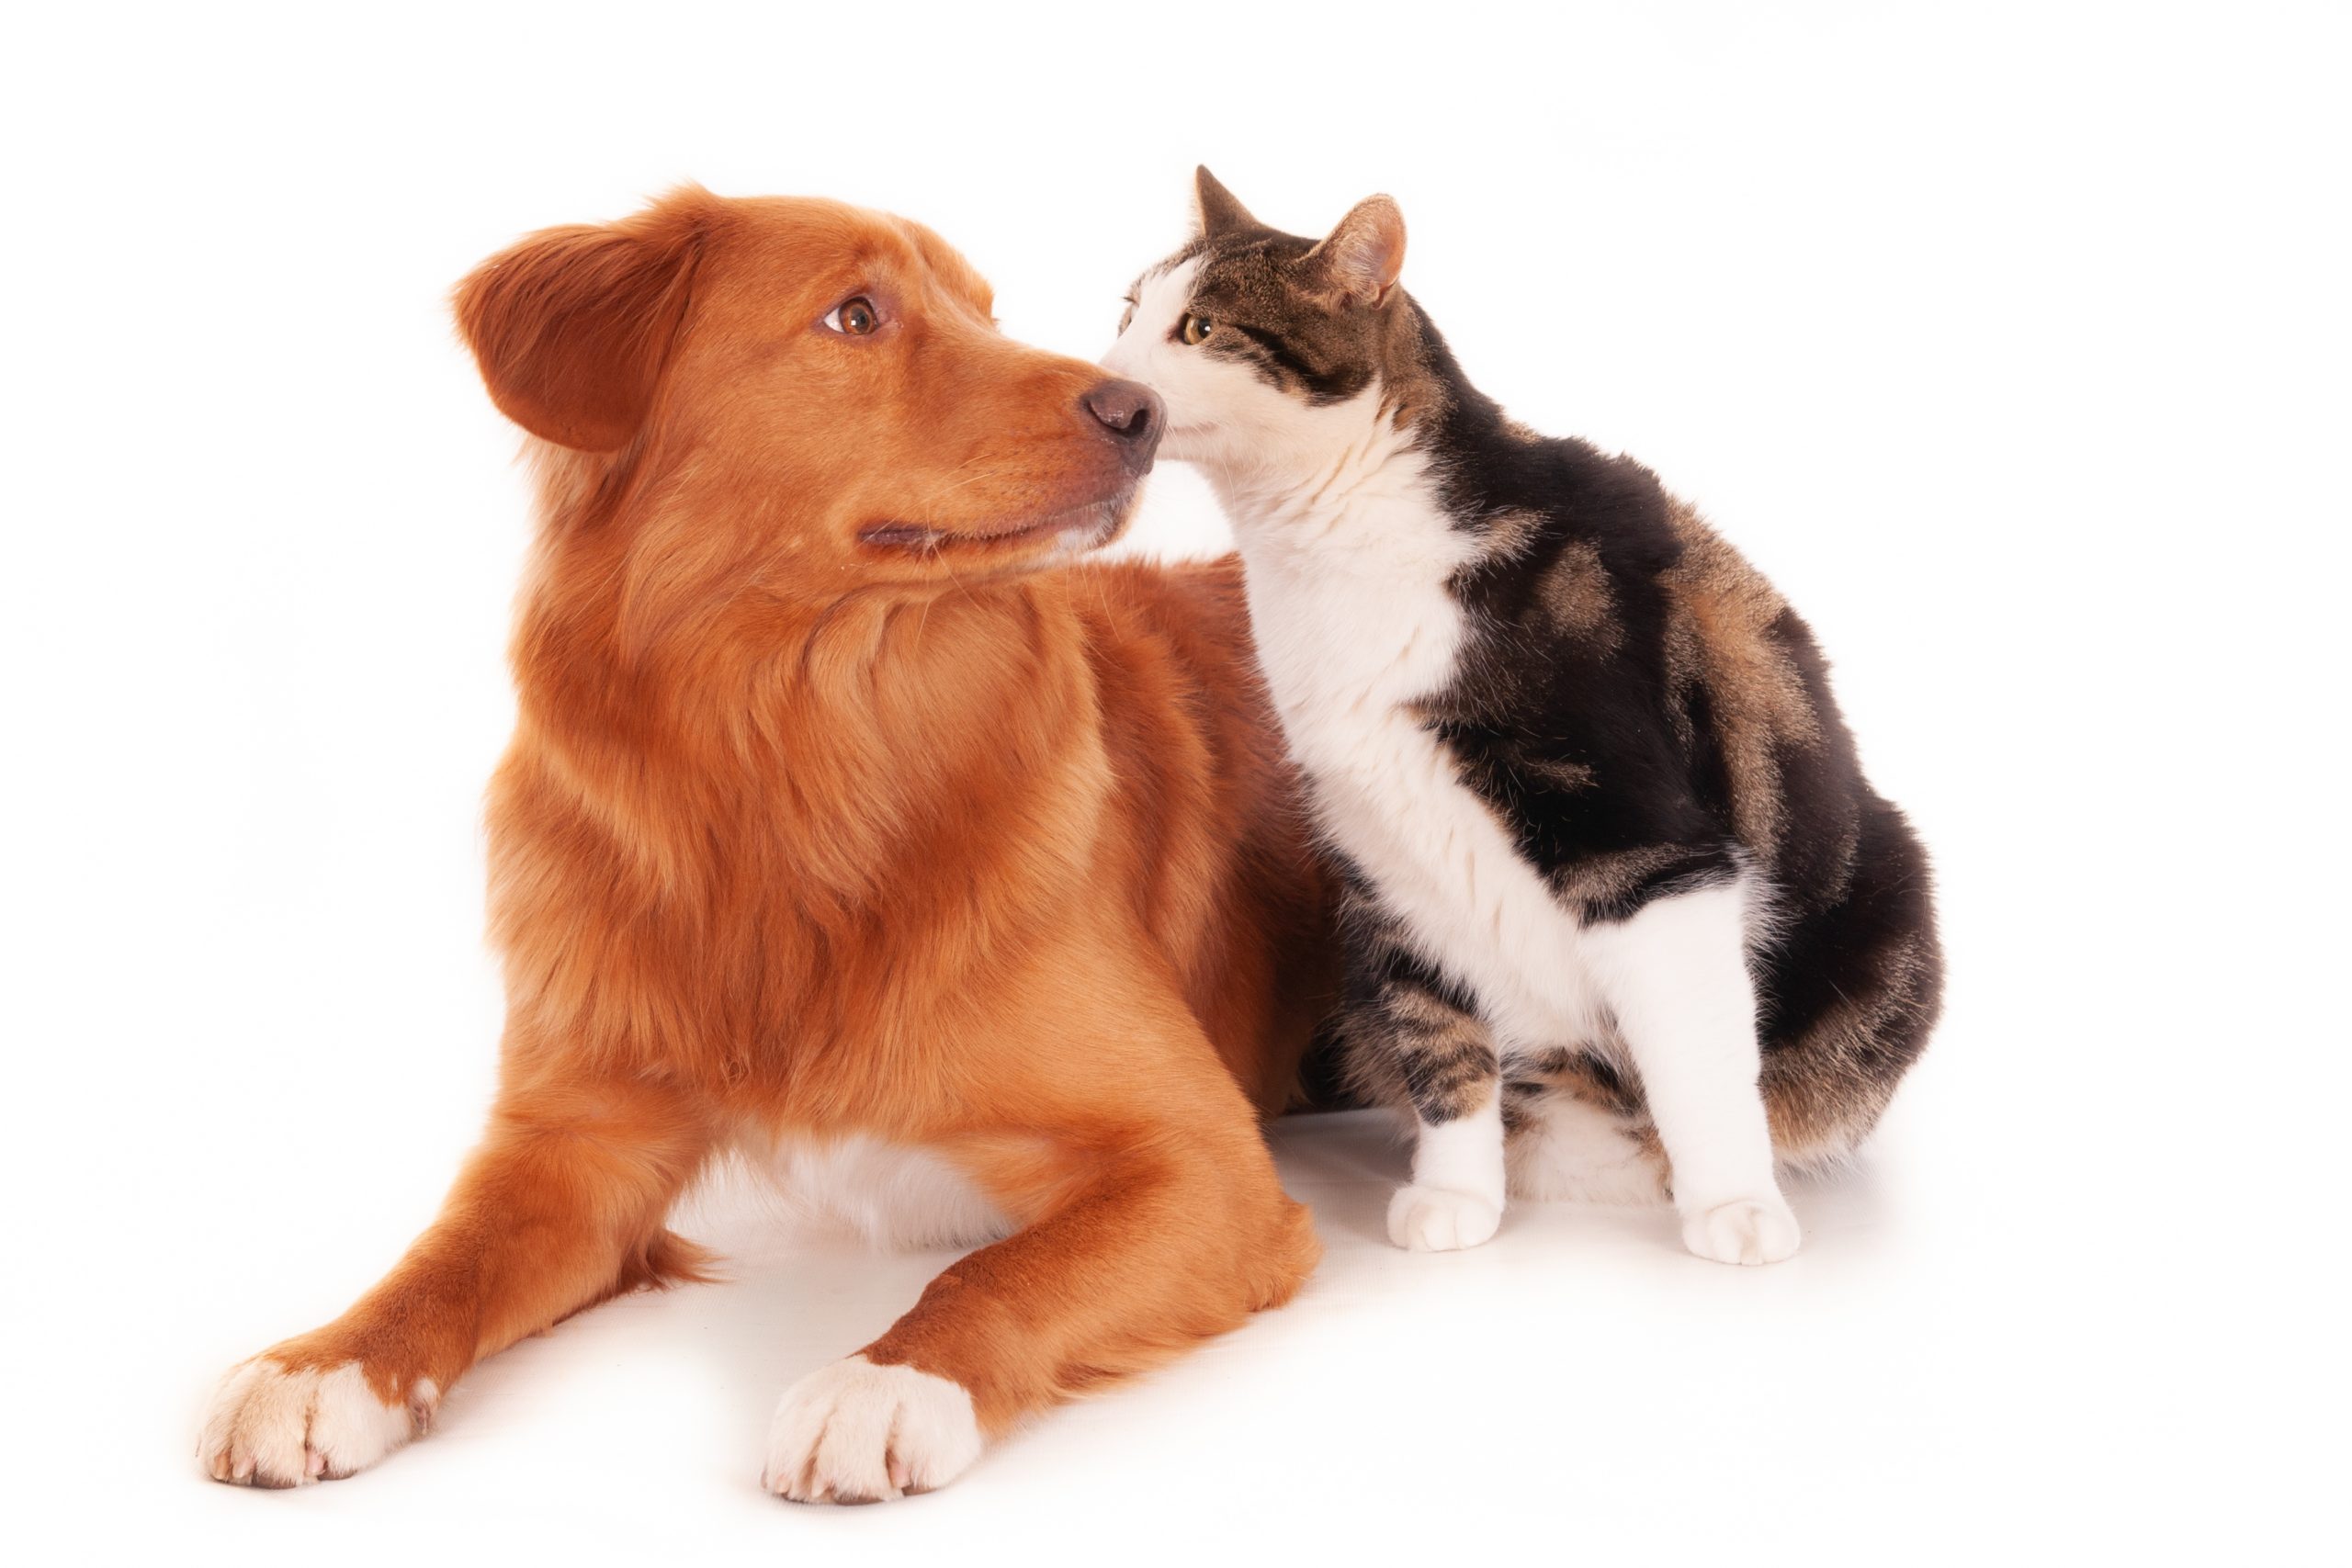 Isolated shot of a Retriever dog snuggling with a calico cat in front of a white background